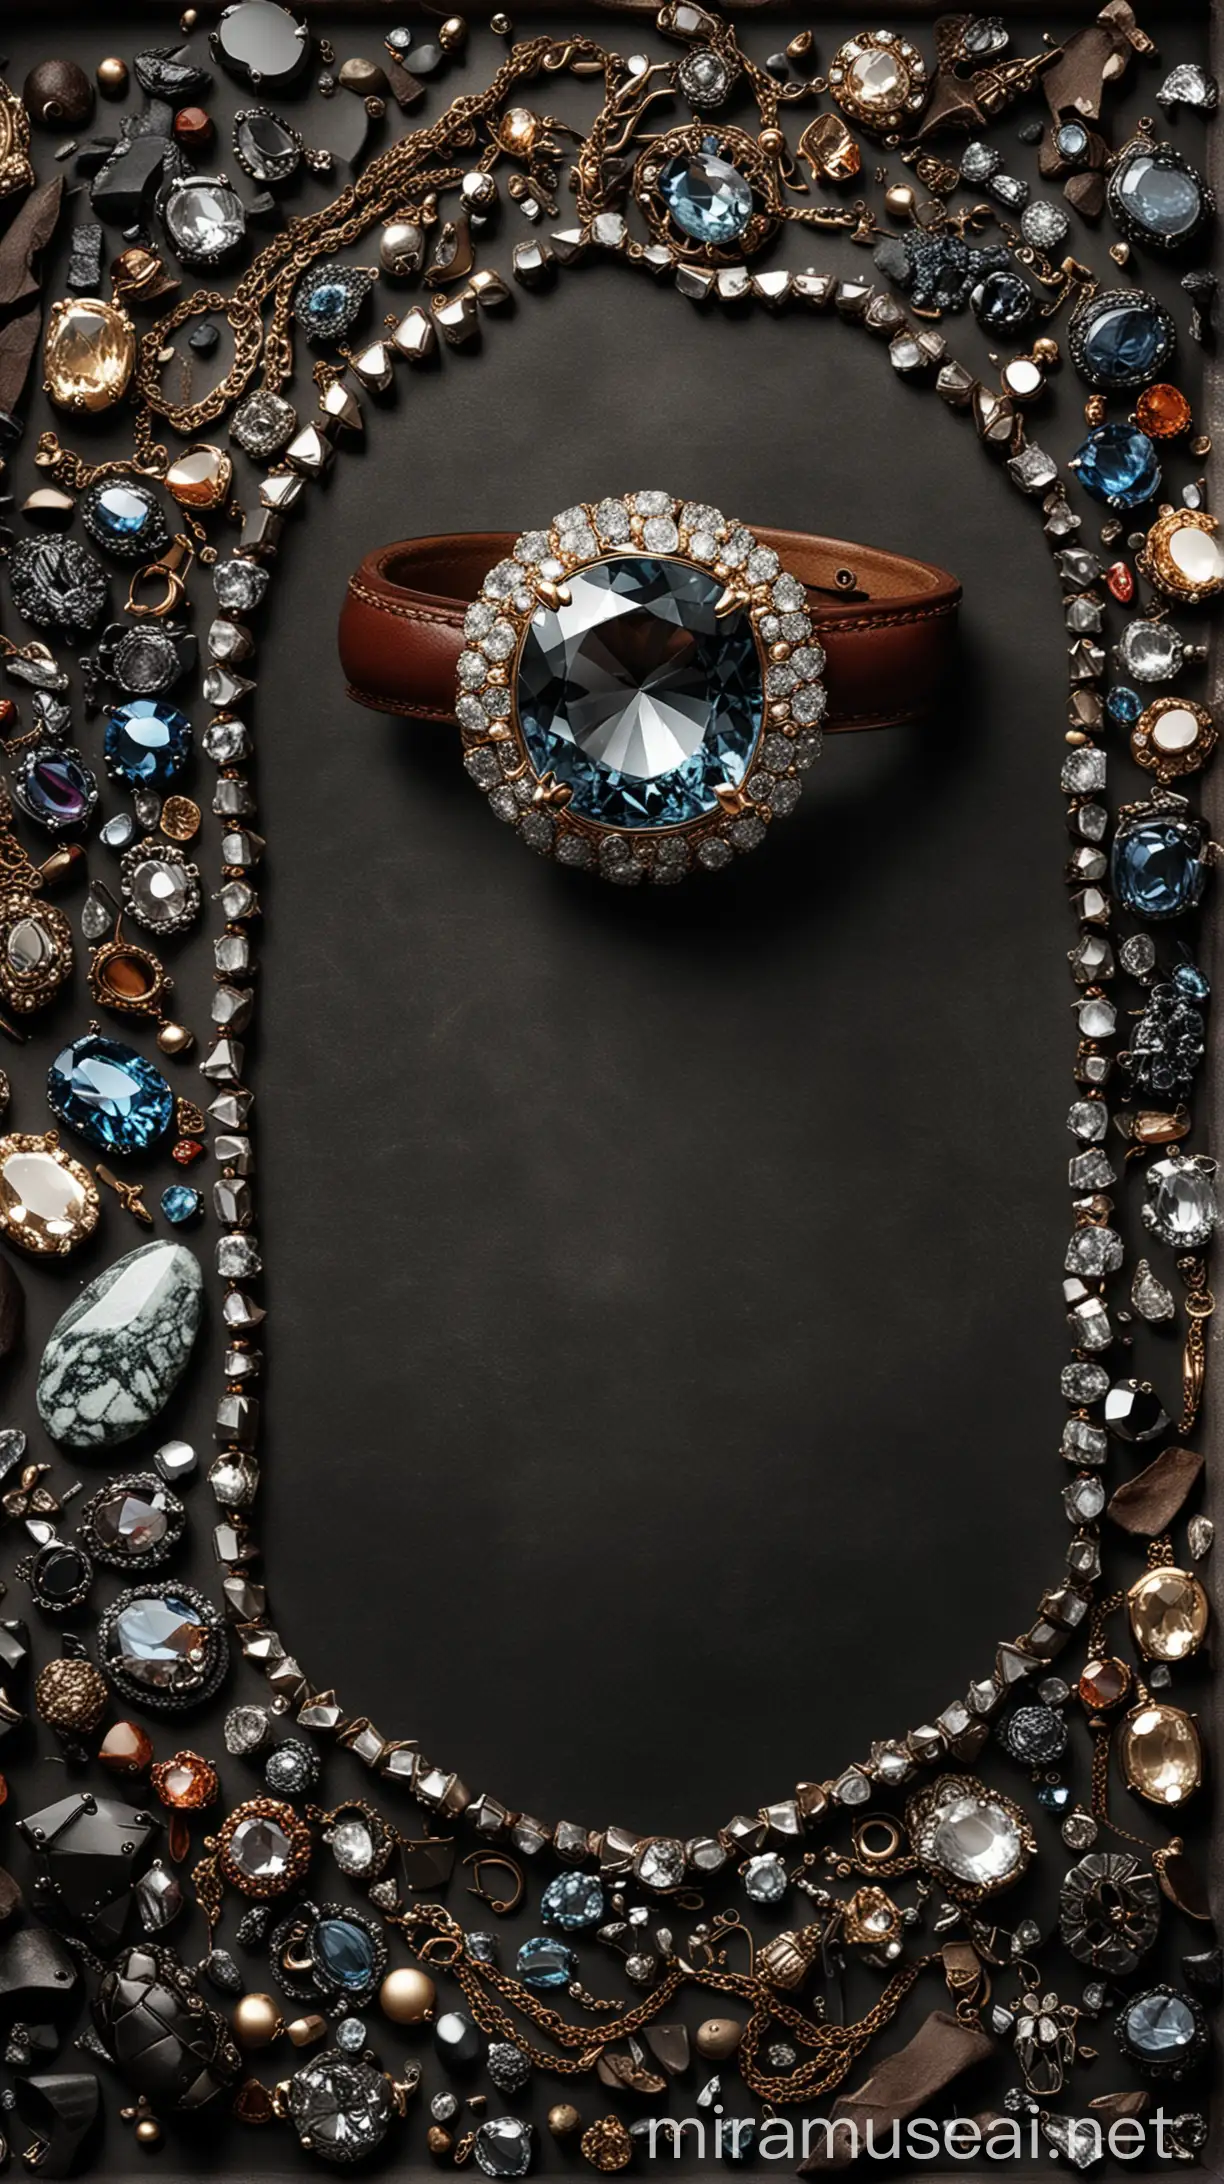 Luxurious Expensive Stone Jewelry on Dark Leather Background